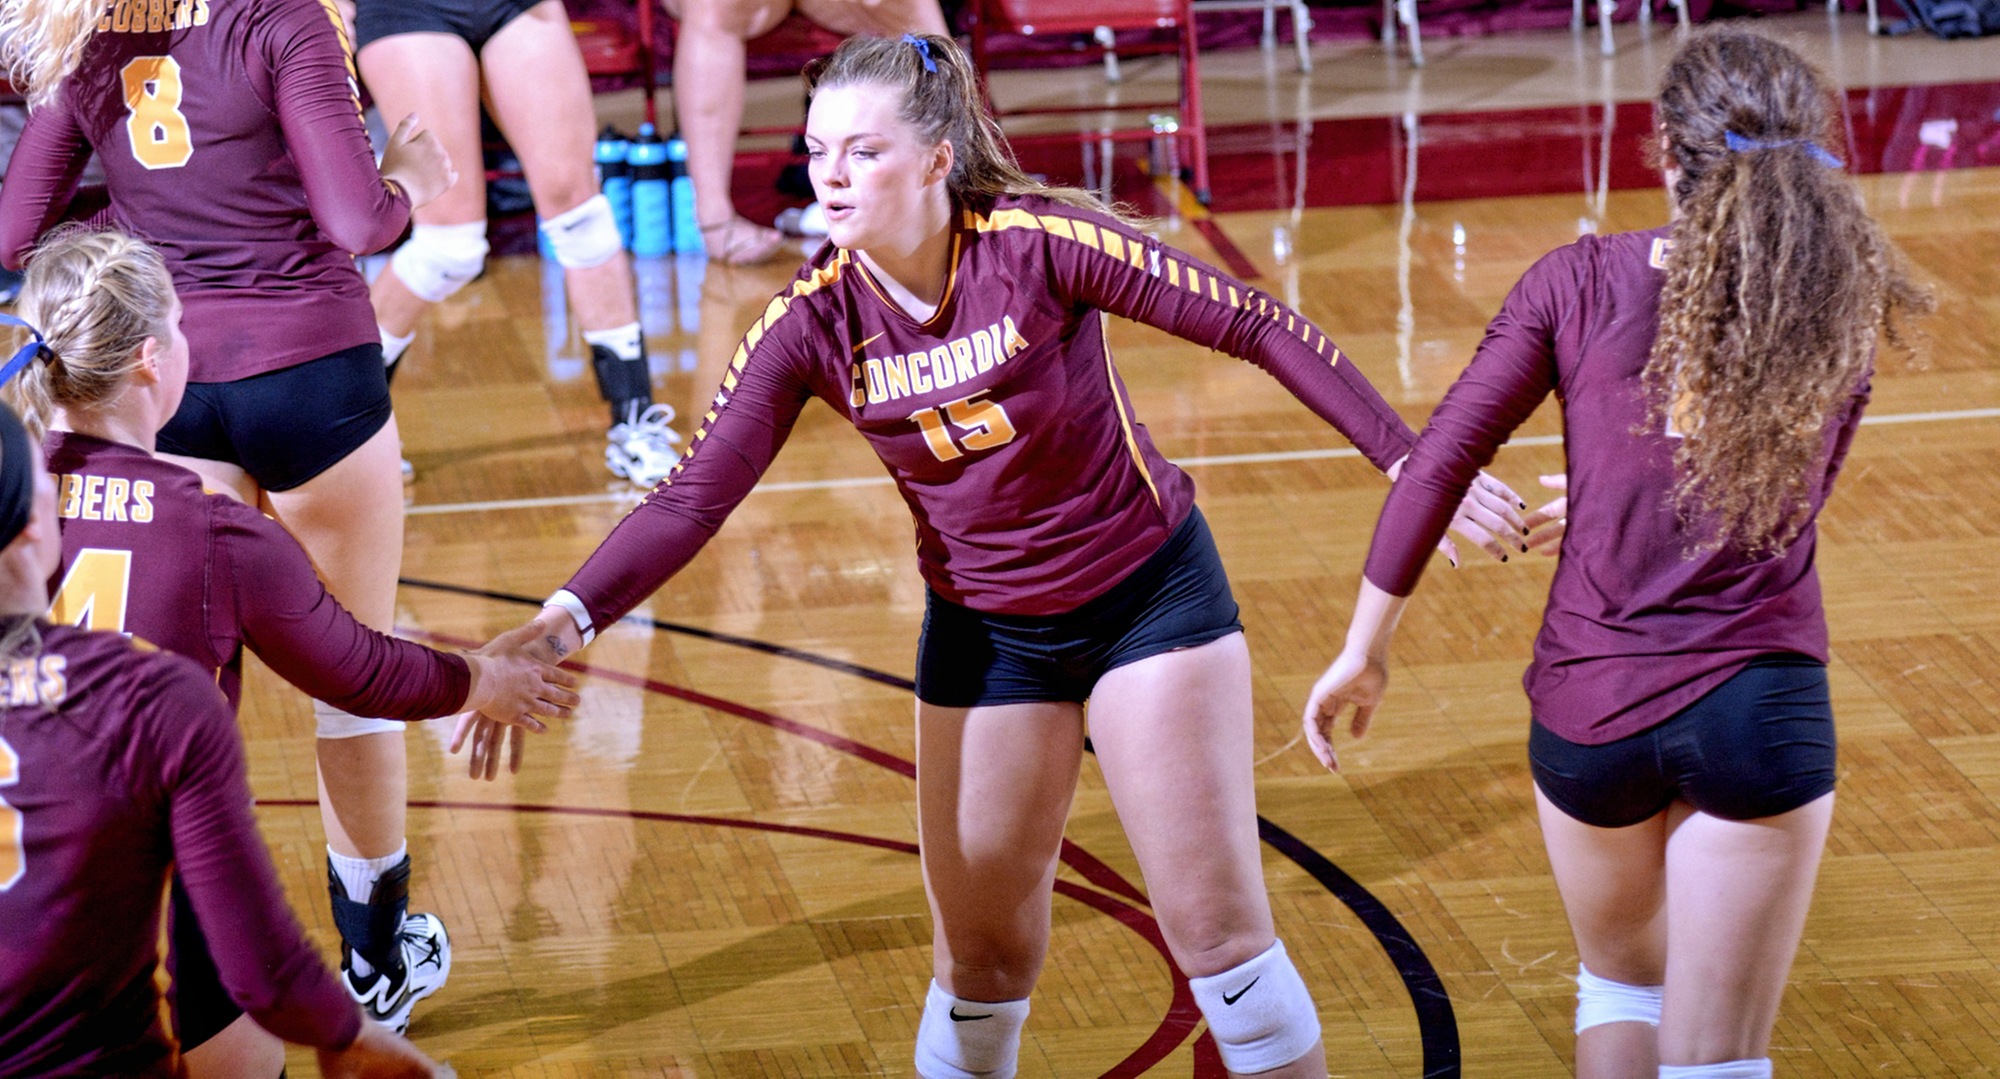 Concordia freshman Faith Anderson had 24 kills in the final two matches at the Wis.-Eau Claire Tournament and was named to the All-Tournament Team.